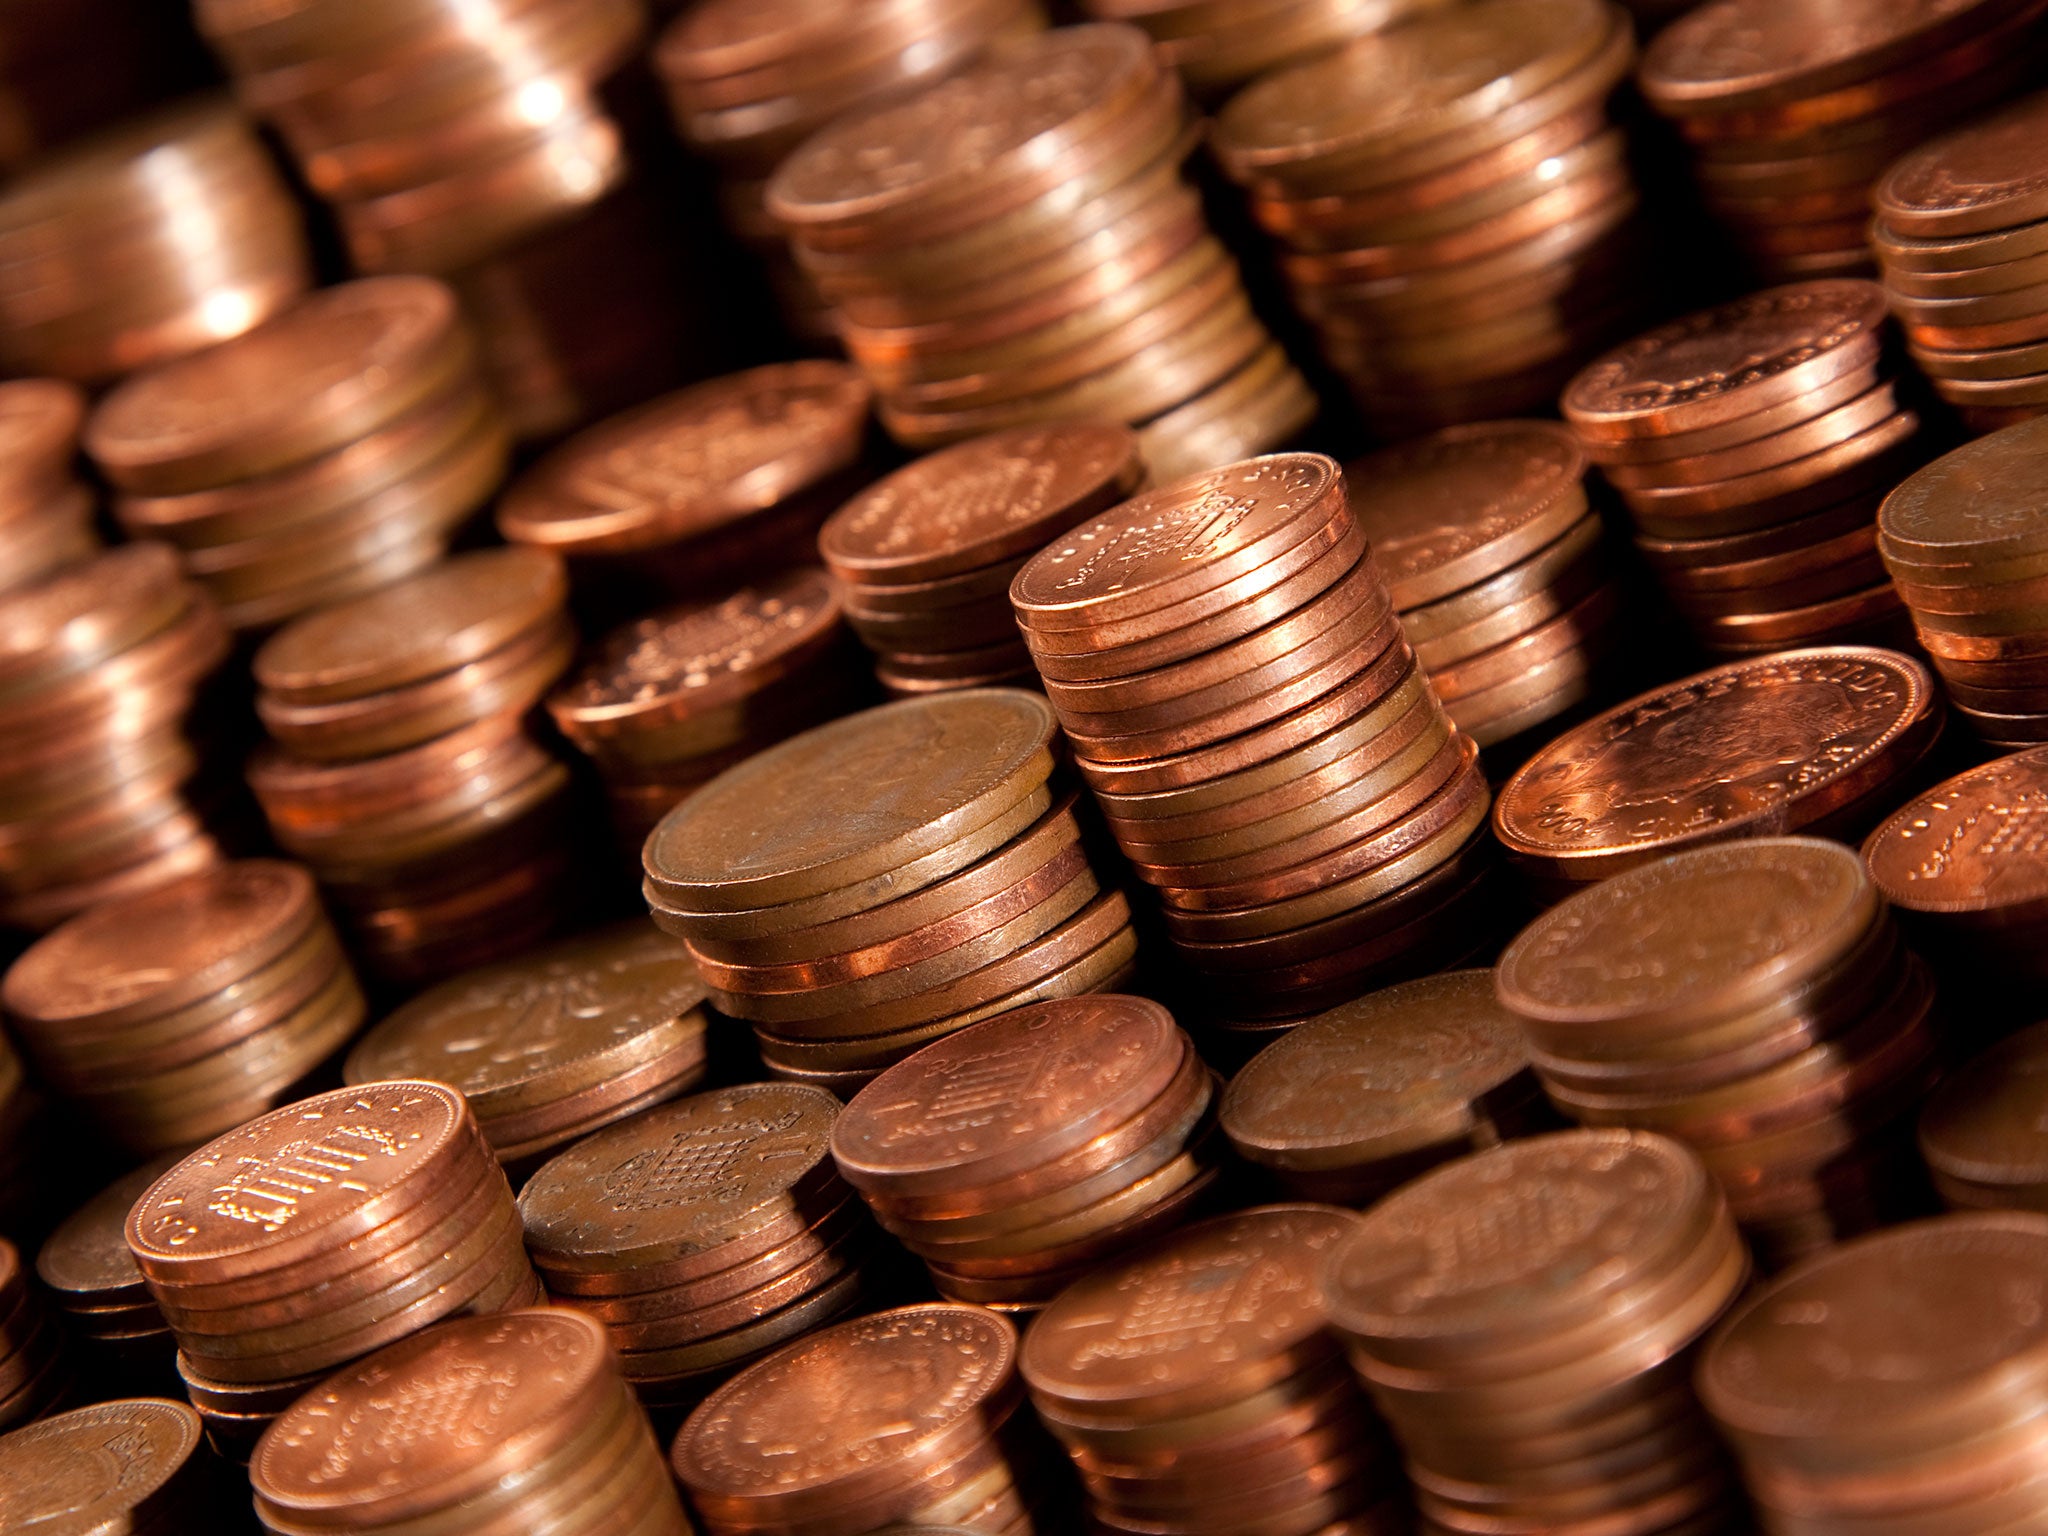 &#13;
Russell Skellett paid £1,851.94 council tax in pennies &#13;